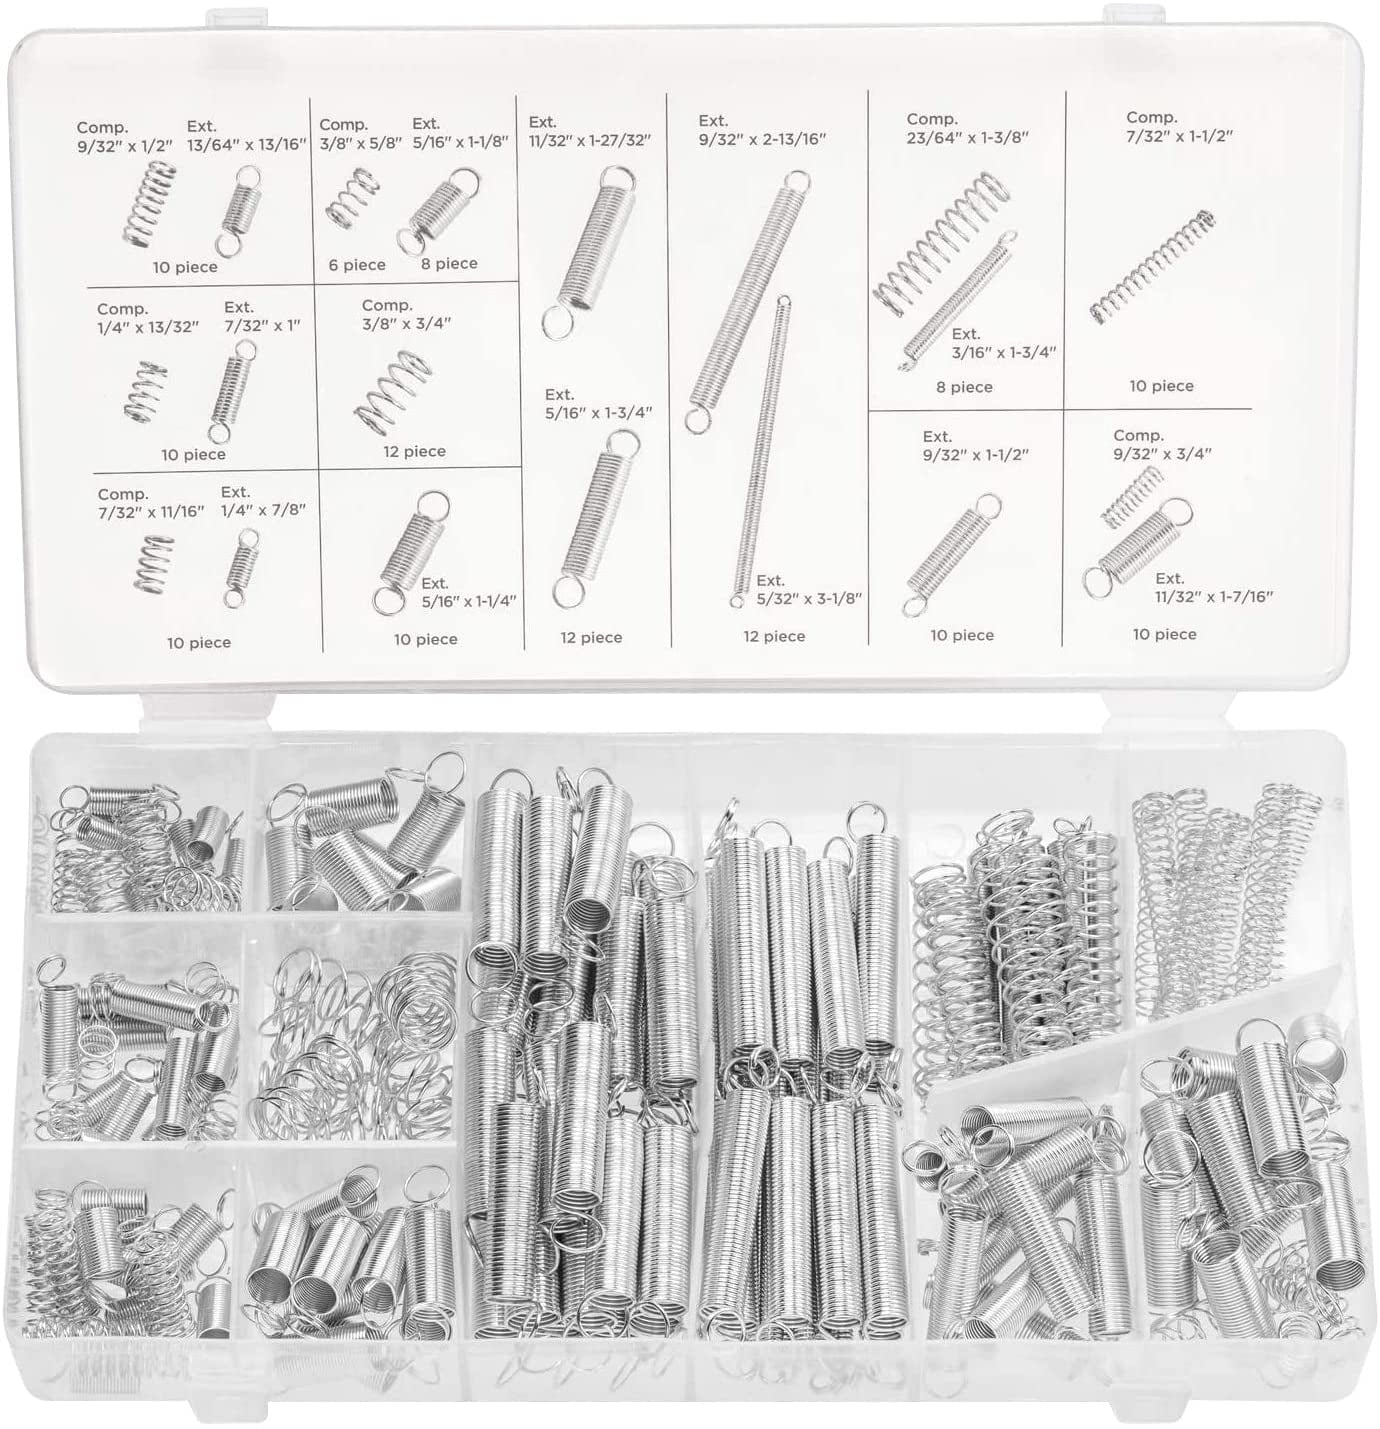 Neiko 50456a Spring Assortment Set 200 Piece Extension And Compression Springs Kit Zinc 